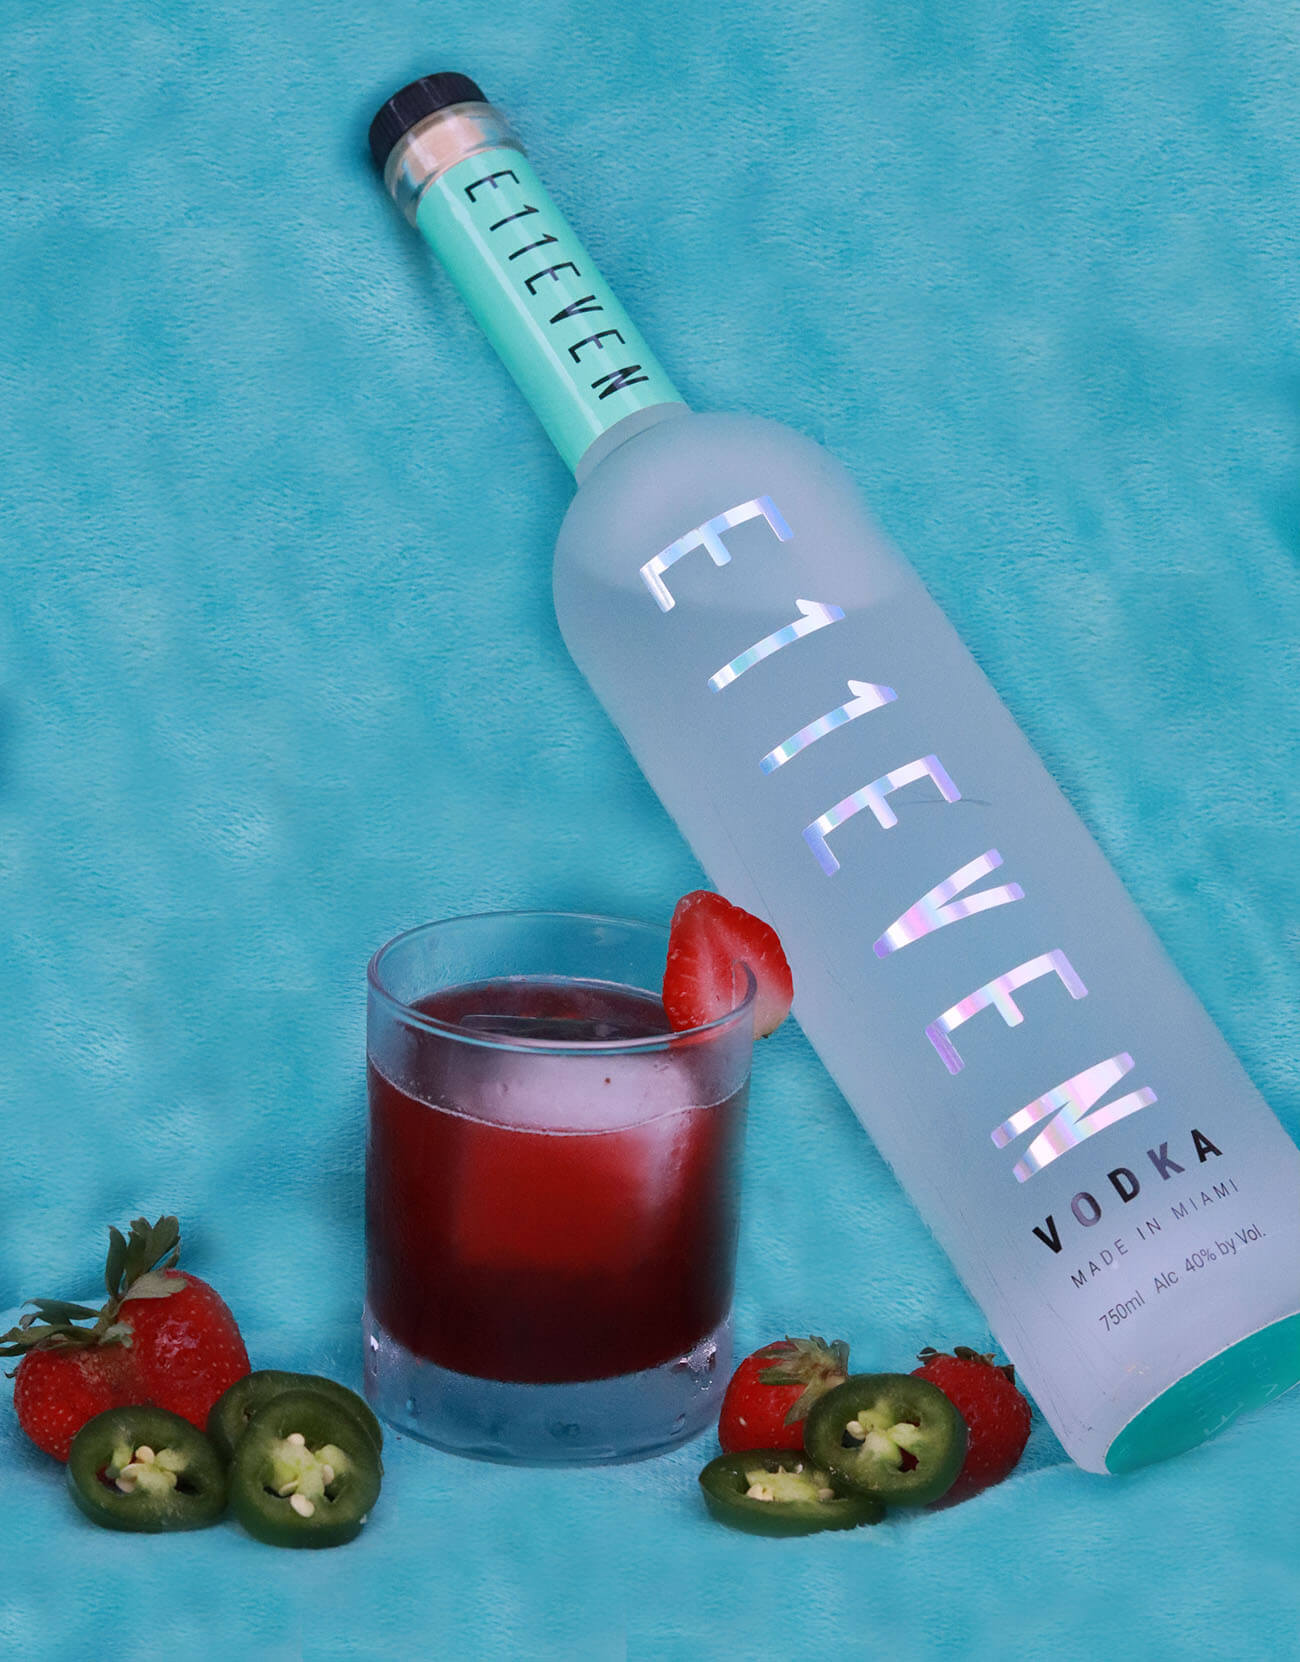 The Chilled 100 Bartenders Create Savory and Spicy Cocktails Using E11even Vodka